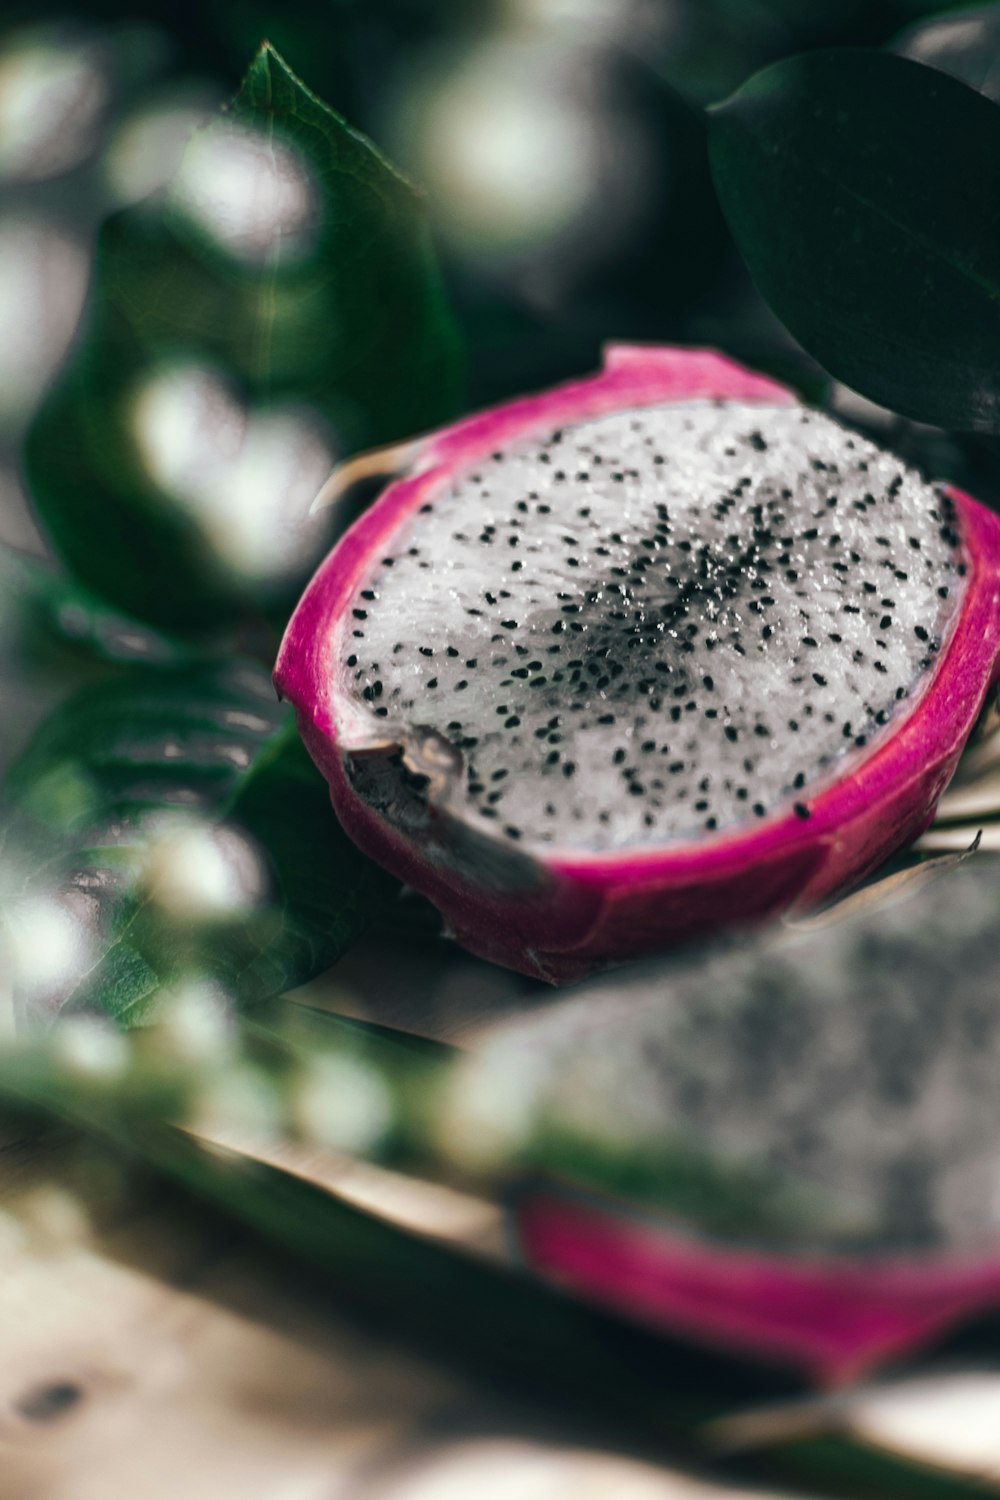 a close up of a dragon fruit on a table